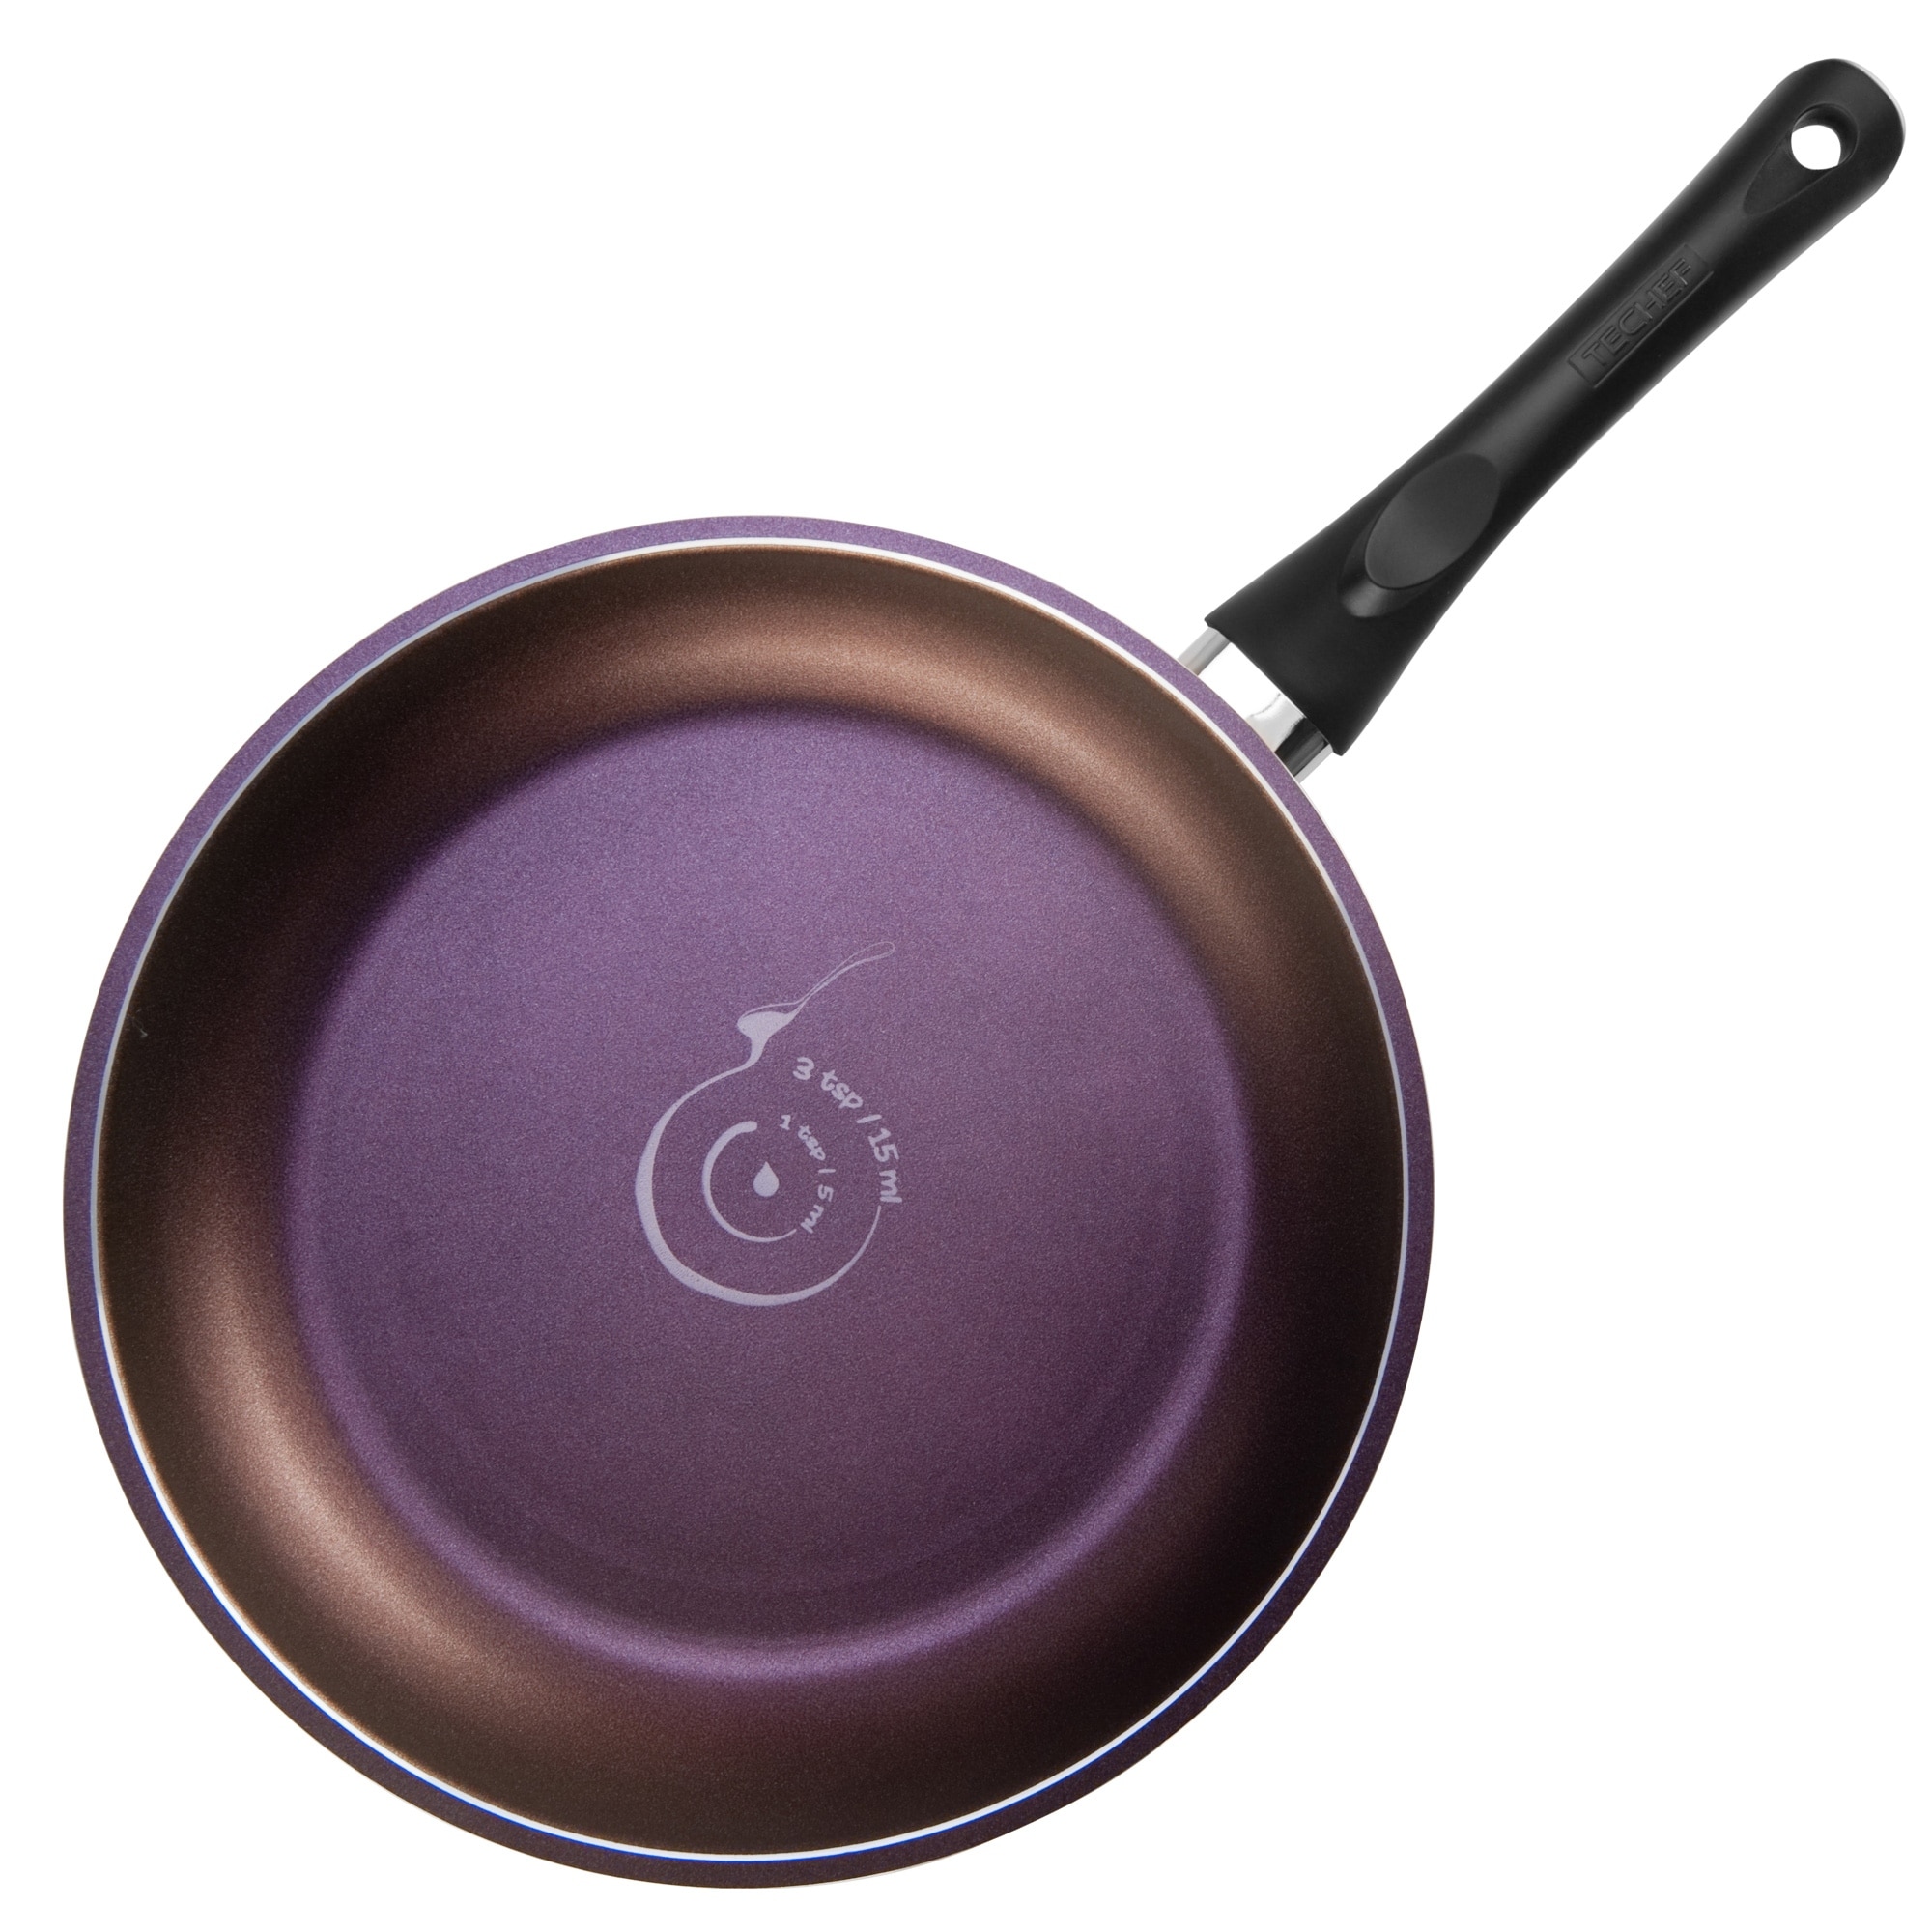 https://ak1.ostkcdn.com/images/products/is/images/direct/a81483a880eddc9100d13bad36a8ca12cc2dc6ac/Art-Collection---12-Inch-Frying-Pan.jpg